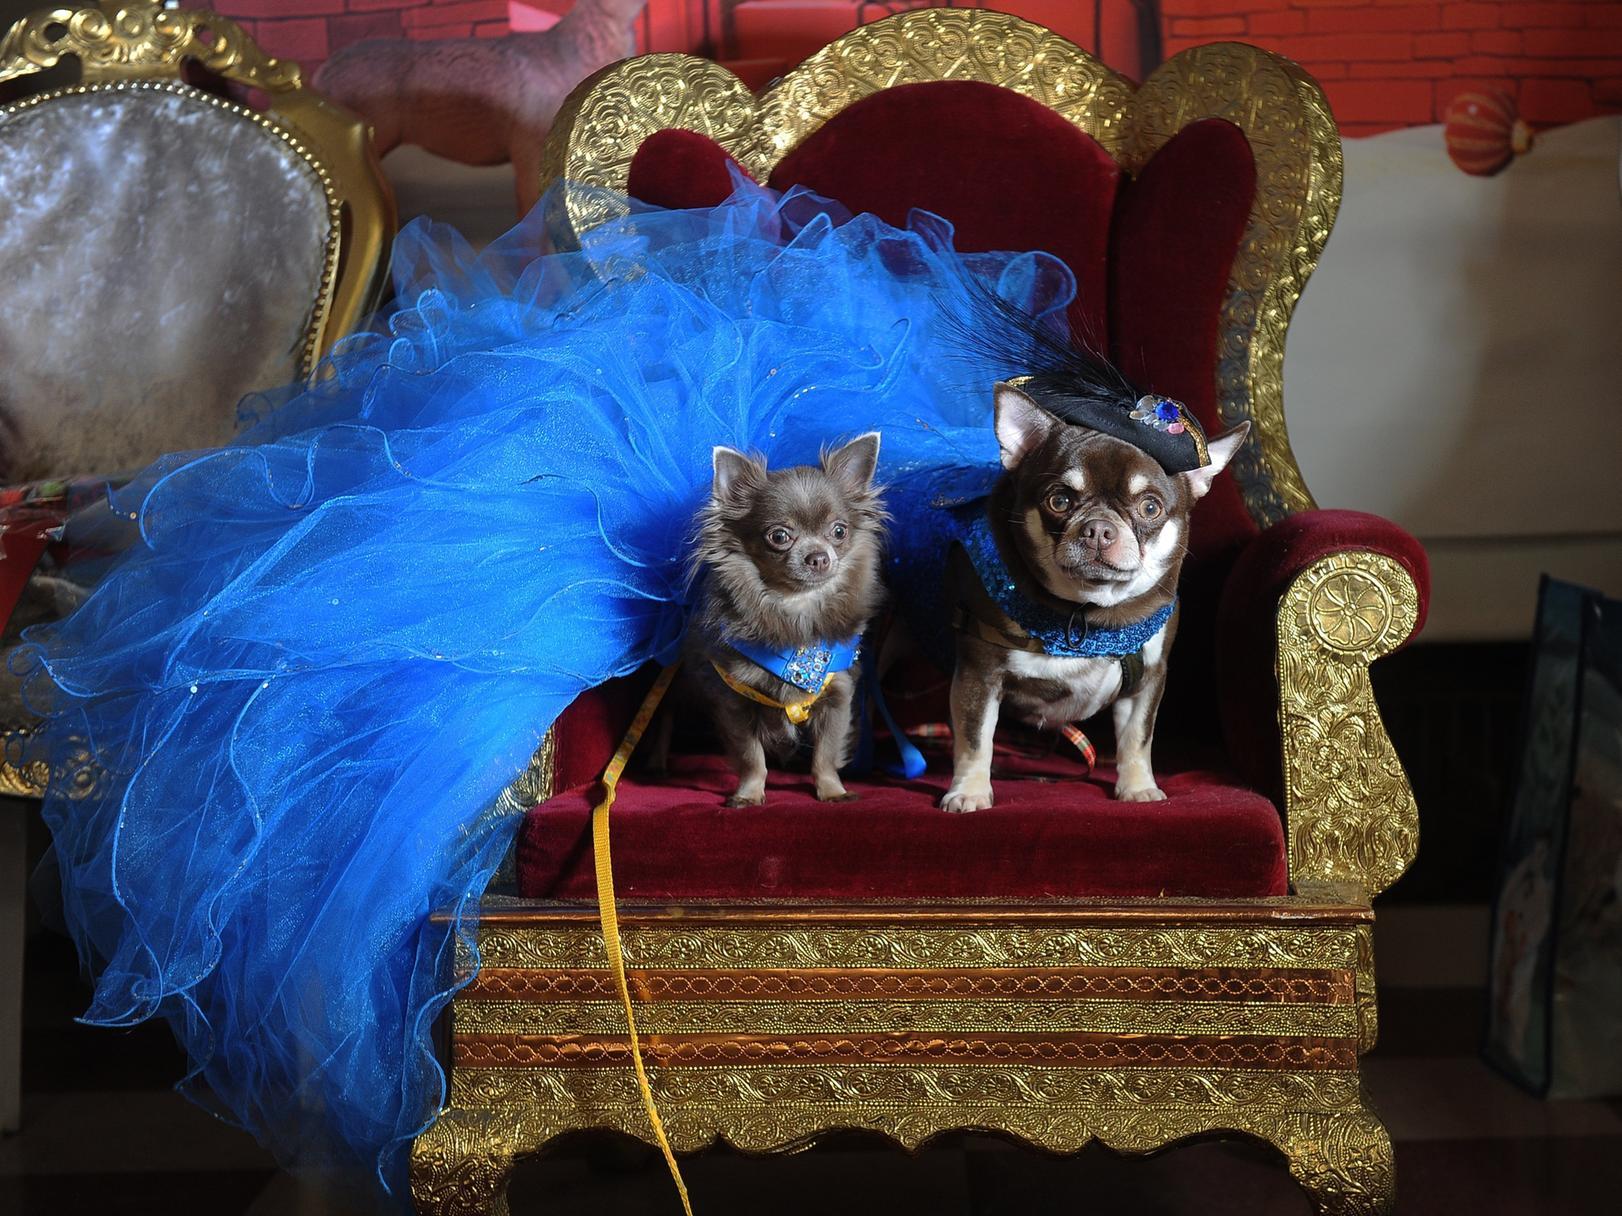 Mascots Genevieve and Rocco in their matching outfits overseeing the pageant.